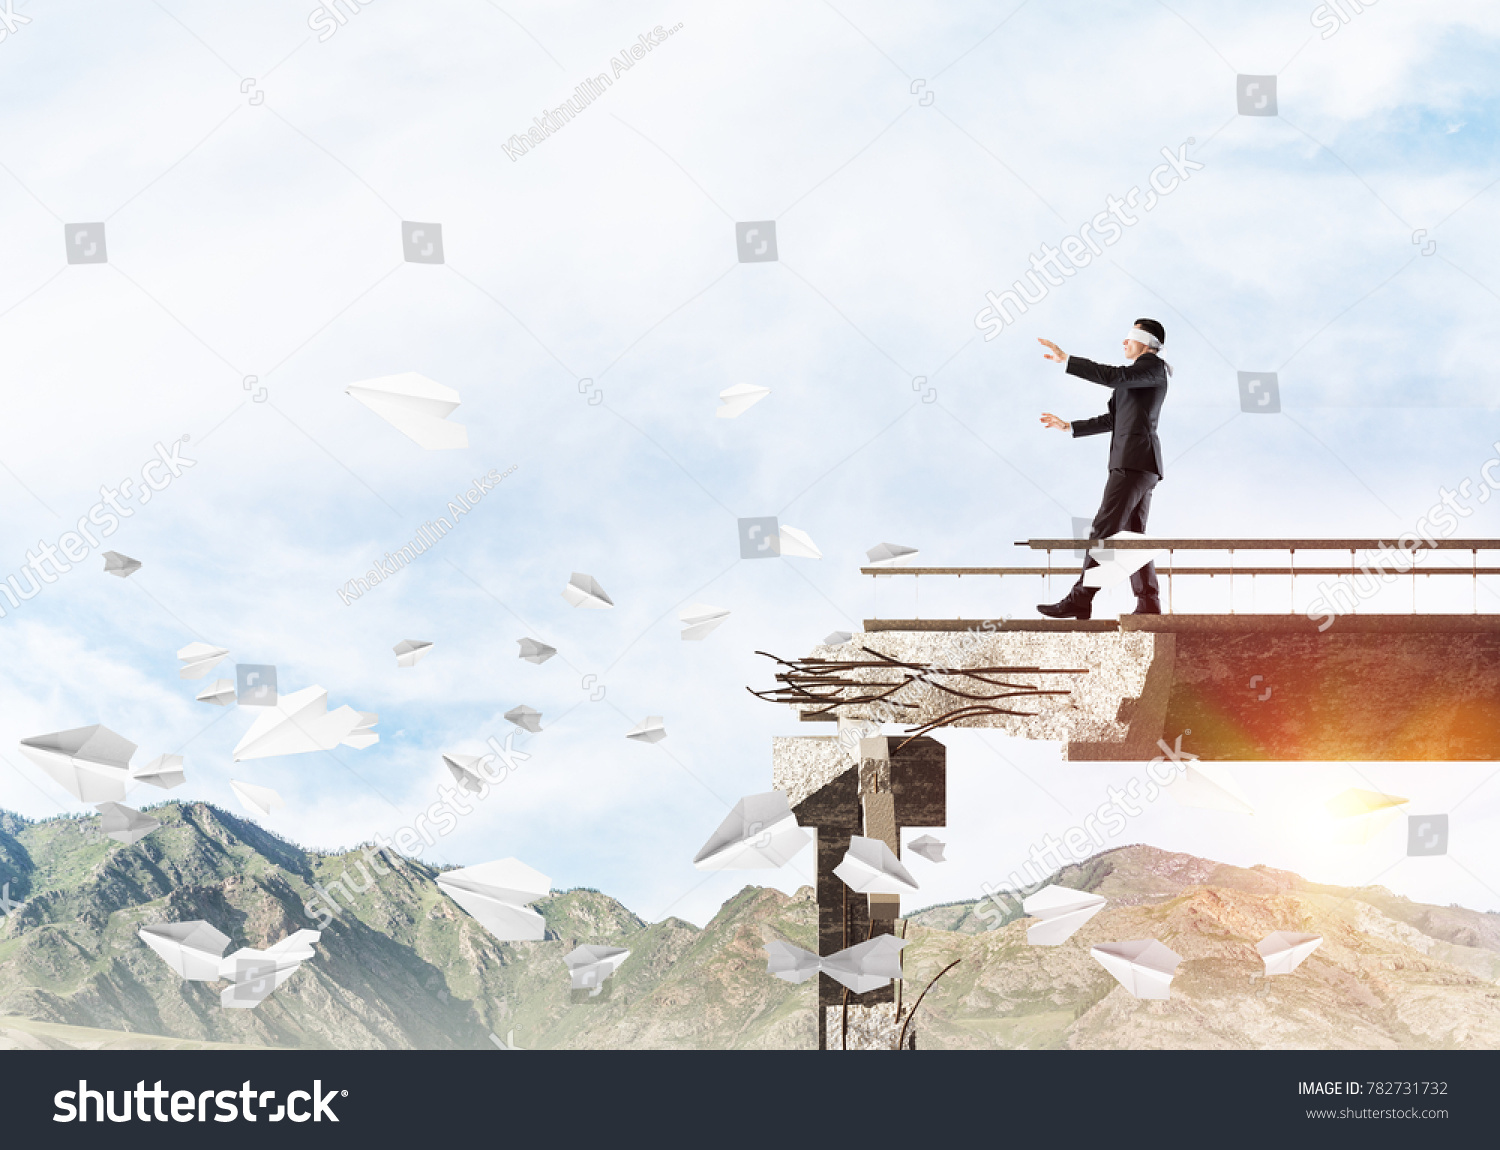 Businessman walking blindfolded on concrete bridge with huge gap as symbol of hidden threats and risks. Skyscape and nature view on background. 3D rendering. #782731732